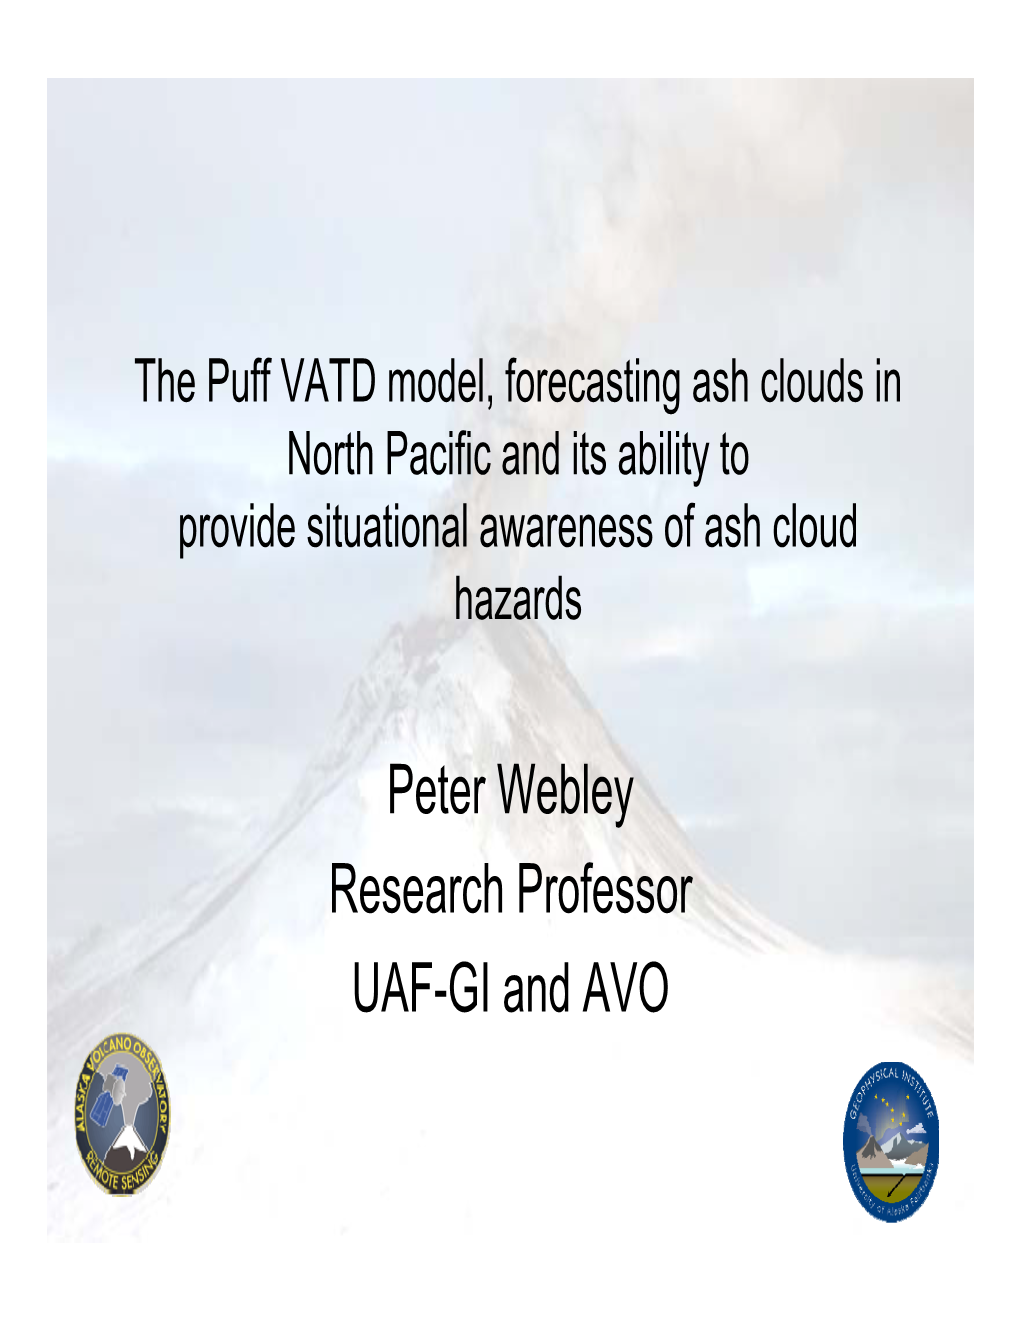 Peter Webley Research Professor UAF-GI and AVO Or Puff VATD Model and What It Can Do